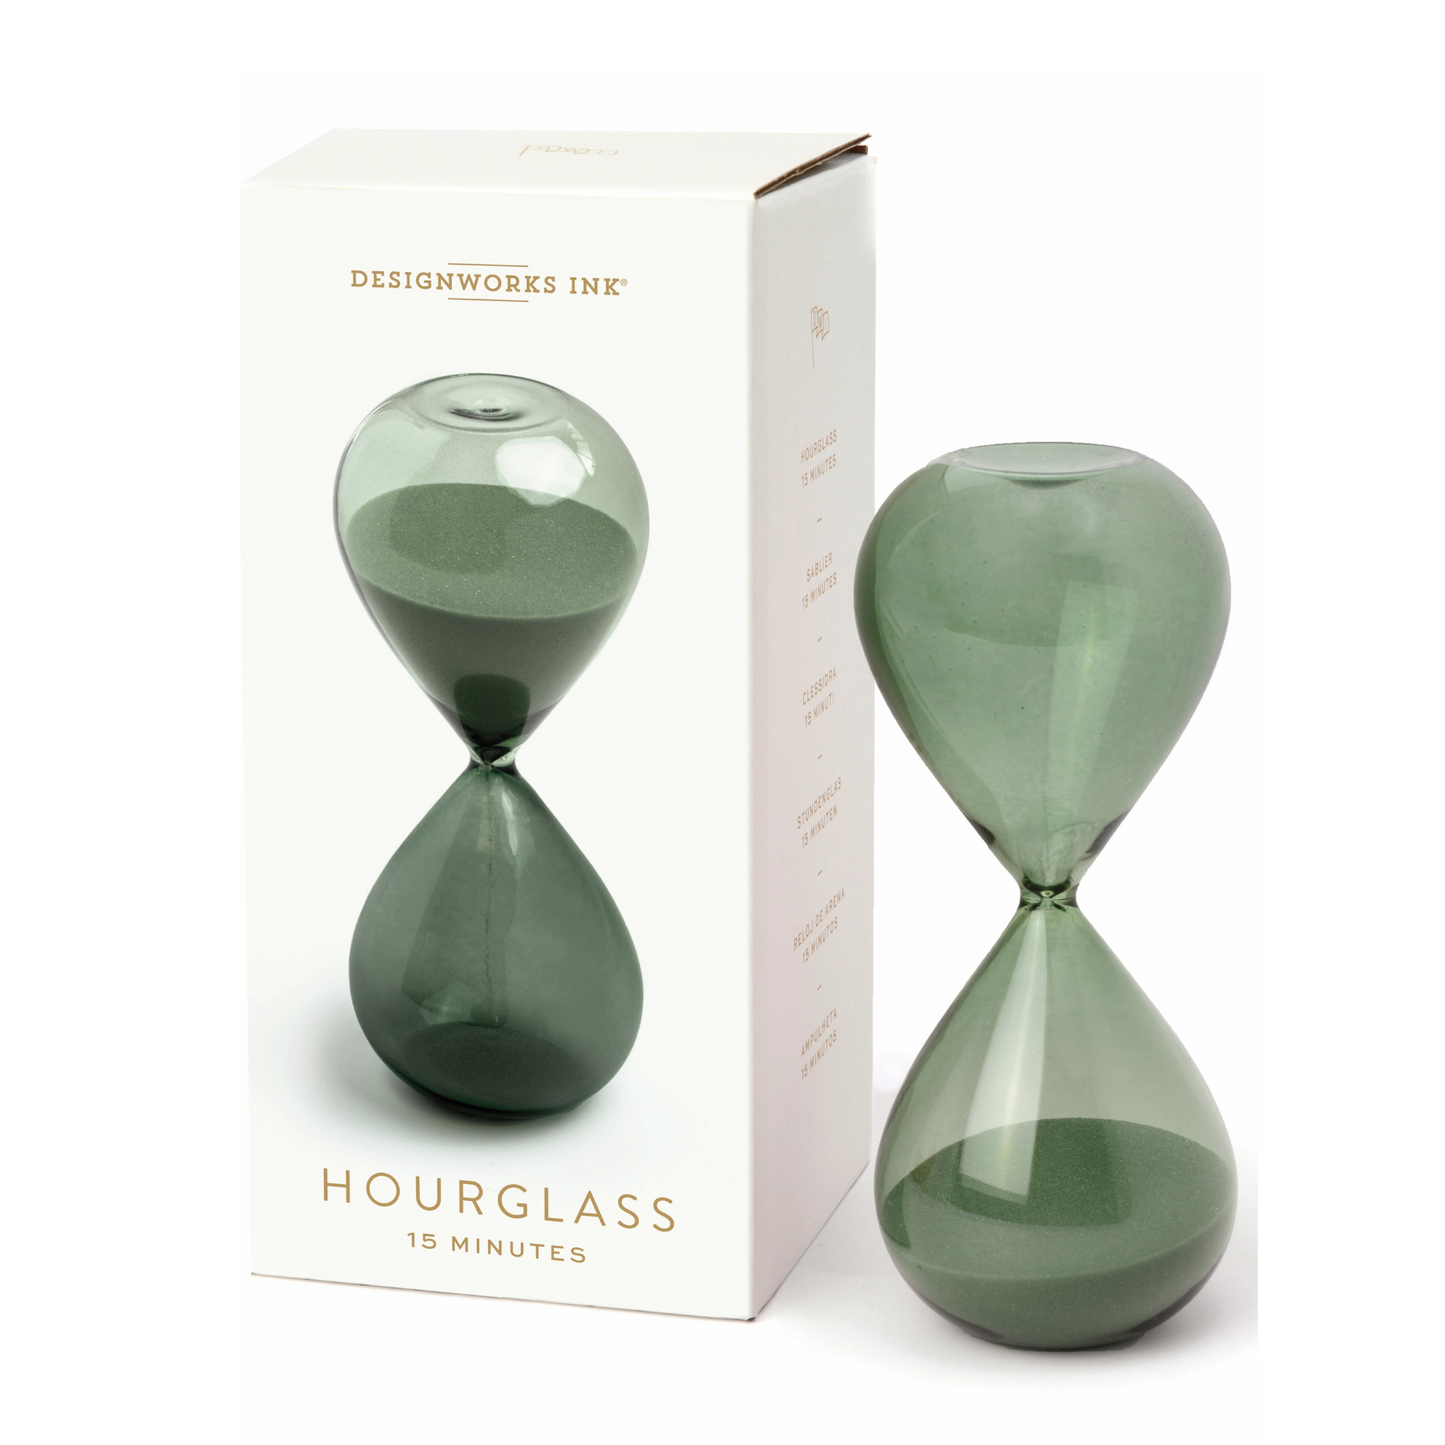 green hourglass standing next to a cream box with an image of the hourglass printed on the front.